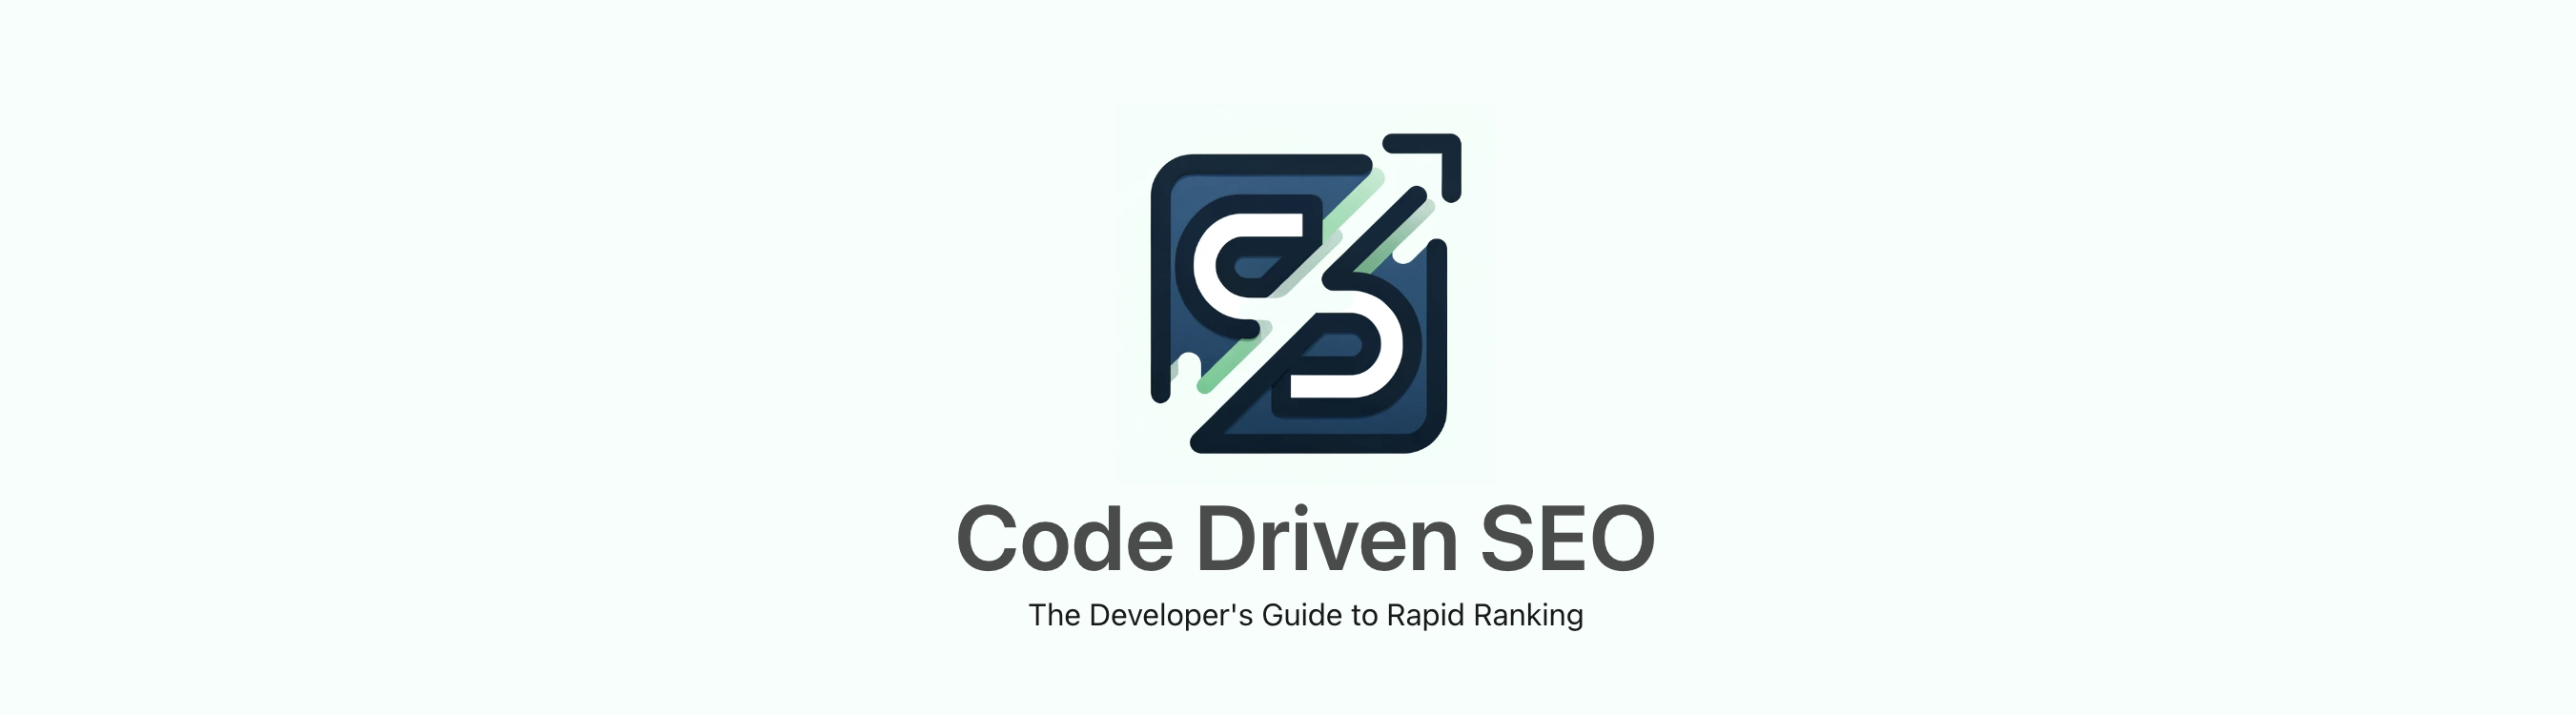 logo of an SEO tool for developers